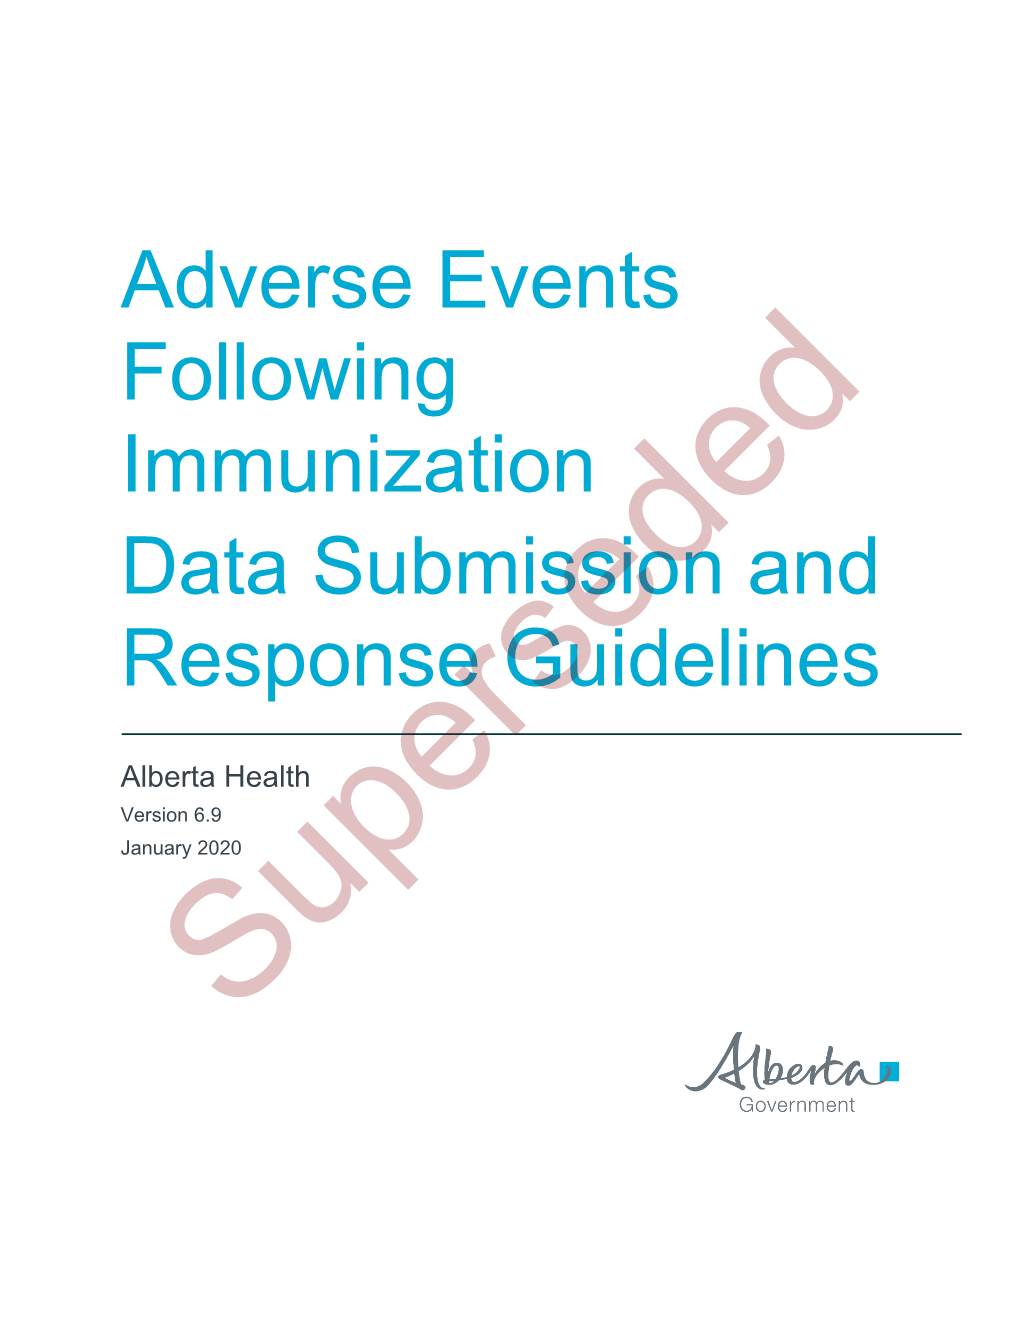 Adverse Events Following Immunization Data Submission and Response Guidelines